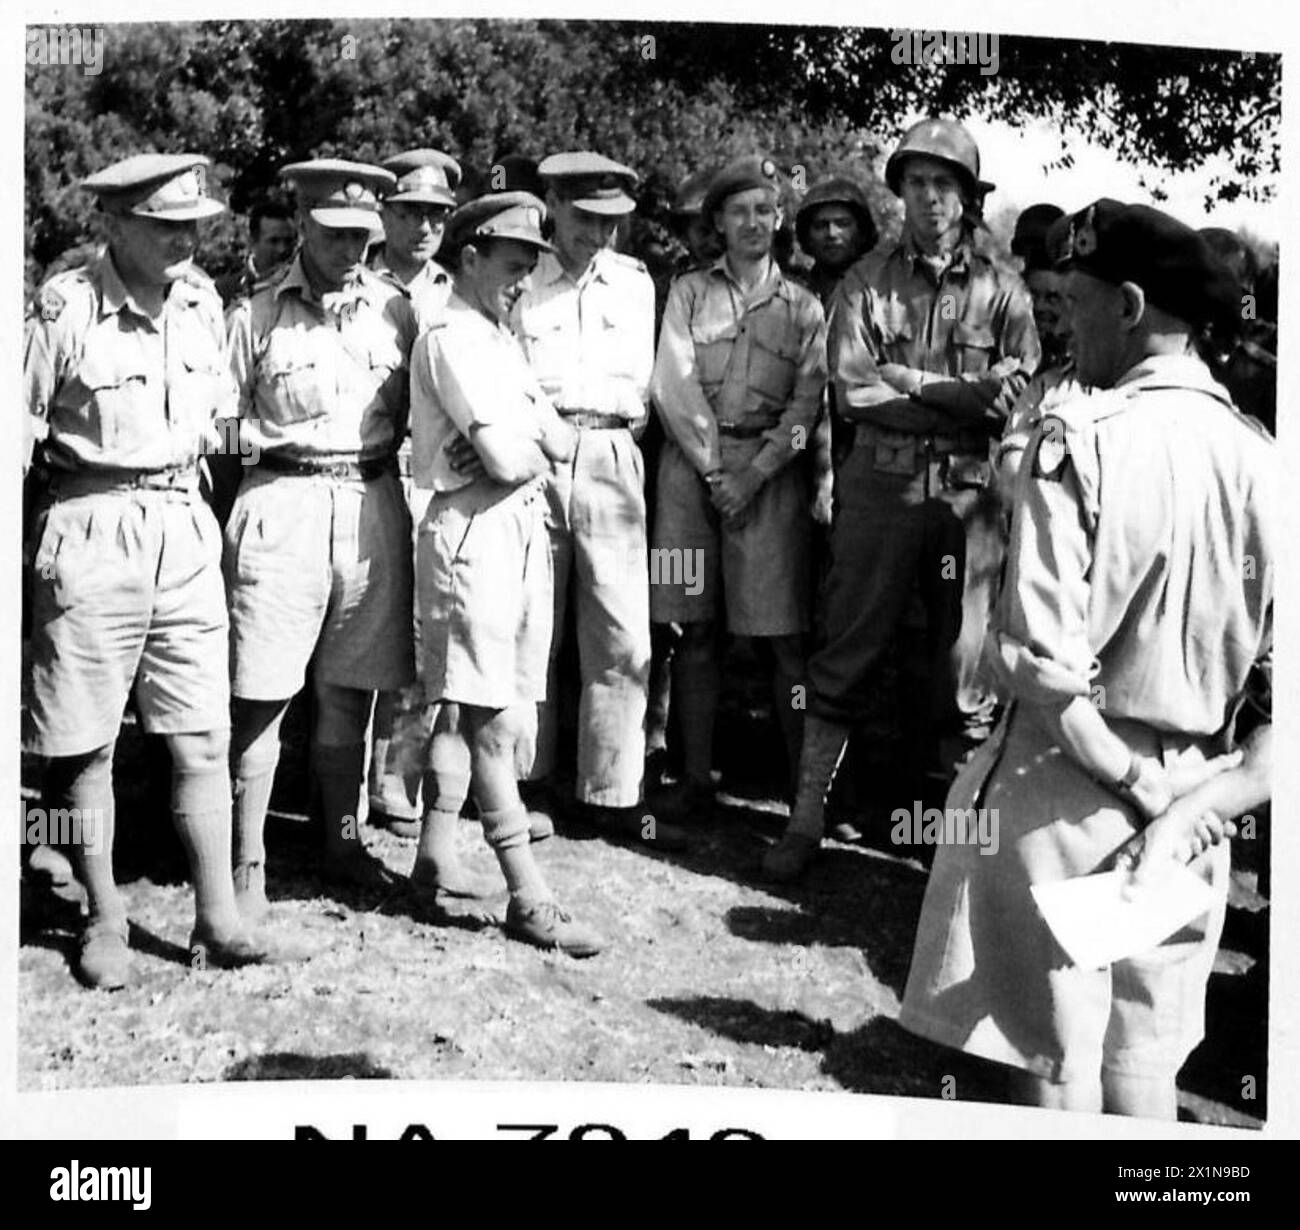 INVASION OF ITALY : THREE WAR CORRESPONDENTS KILLED - This picture taken during General Montgomery's visit to 5th Army HQ where he met Lieut.General Mark Clark, shows the 8th Army Commander chatting to War Correspondents; General Montgomery reversed the usual procedure at interviews by asking the correspondents when the war would finish. Second from the left is A.B.Austin and in the centre, wearing beret, is Stewart Sale, British Army Stock Photo